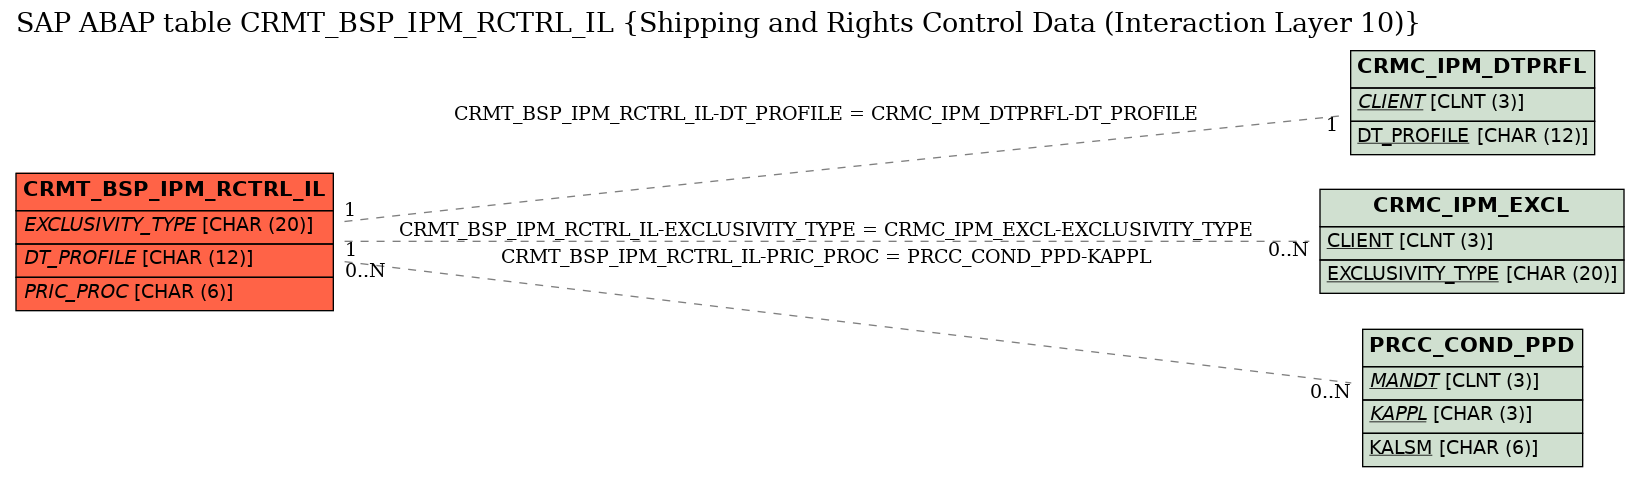 E-R Diagram for table CRMT_BSP_IPM_RCTRL_IL (Shipping and Rights Control Data (Interaction Layer 10))